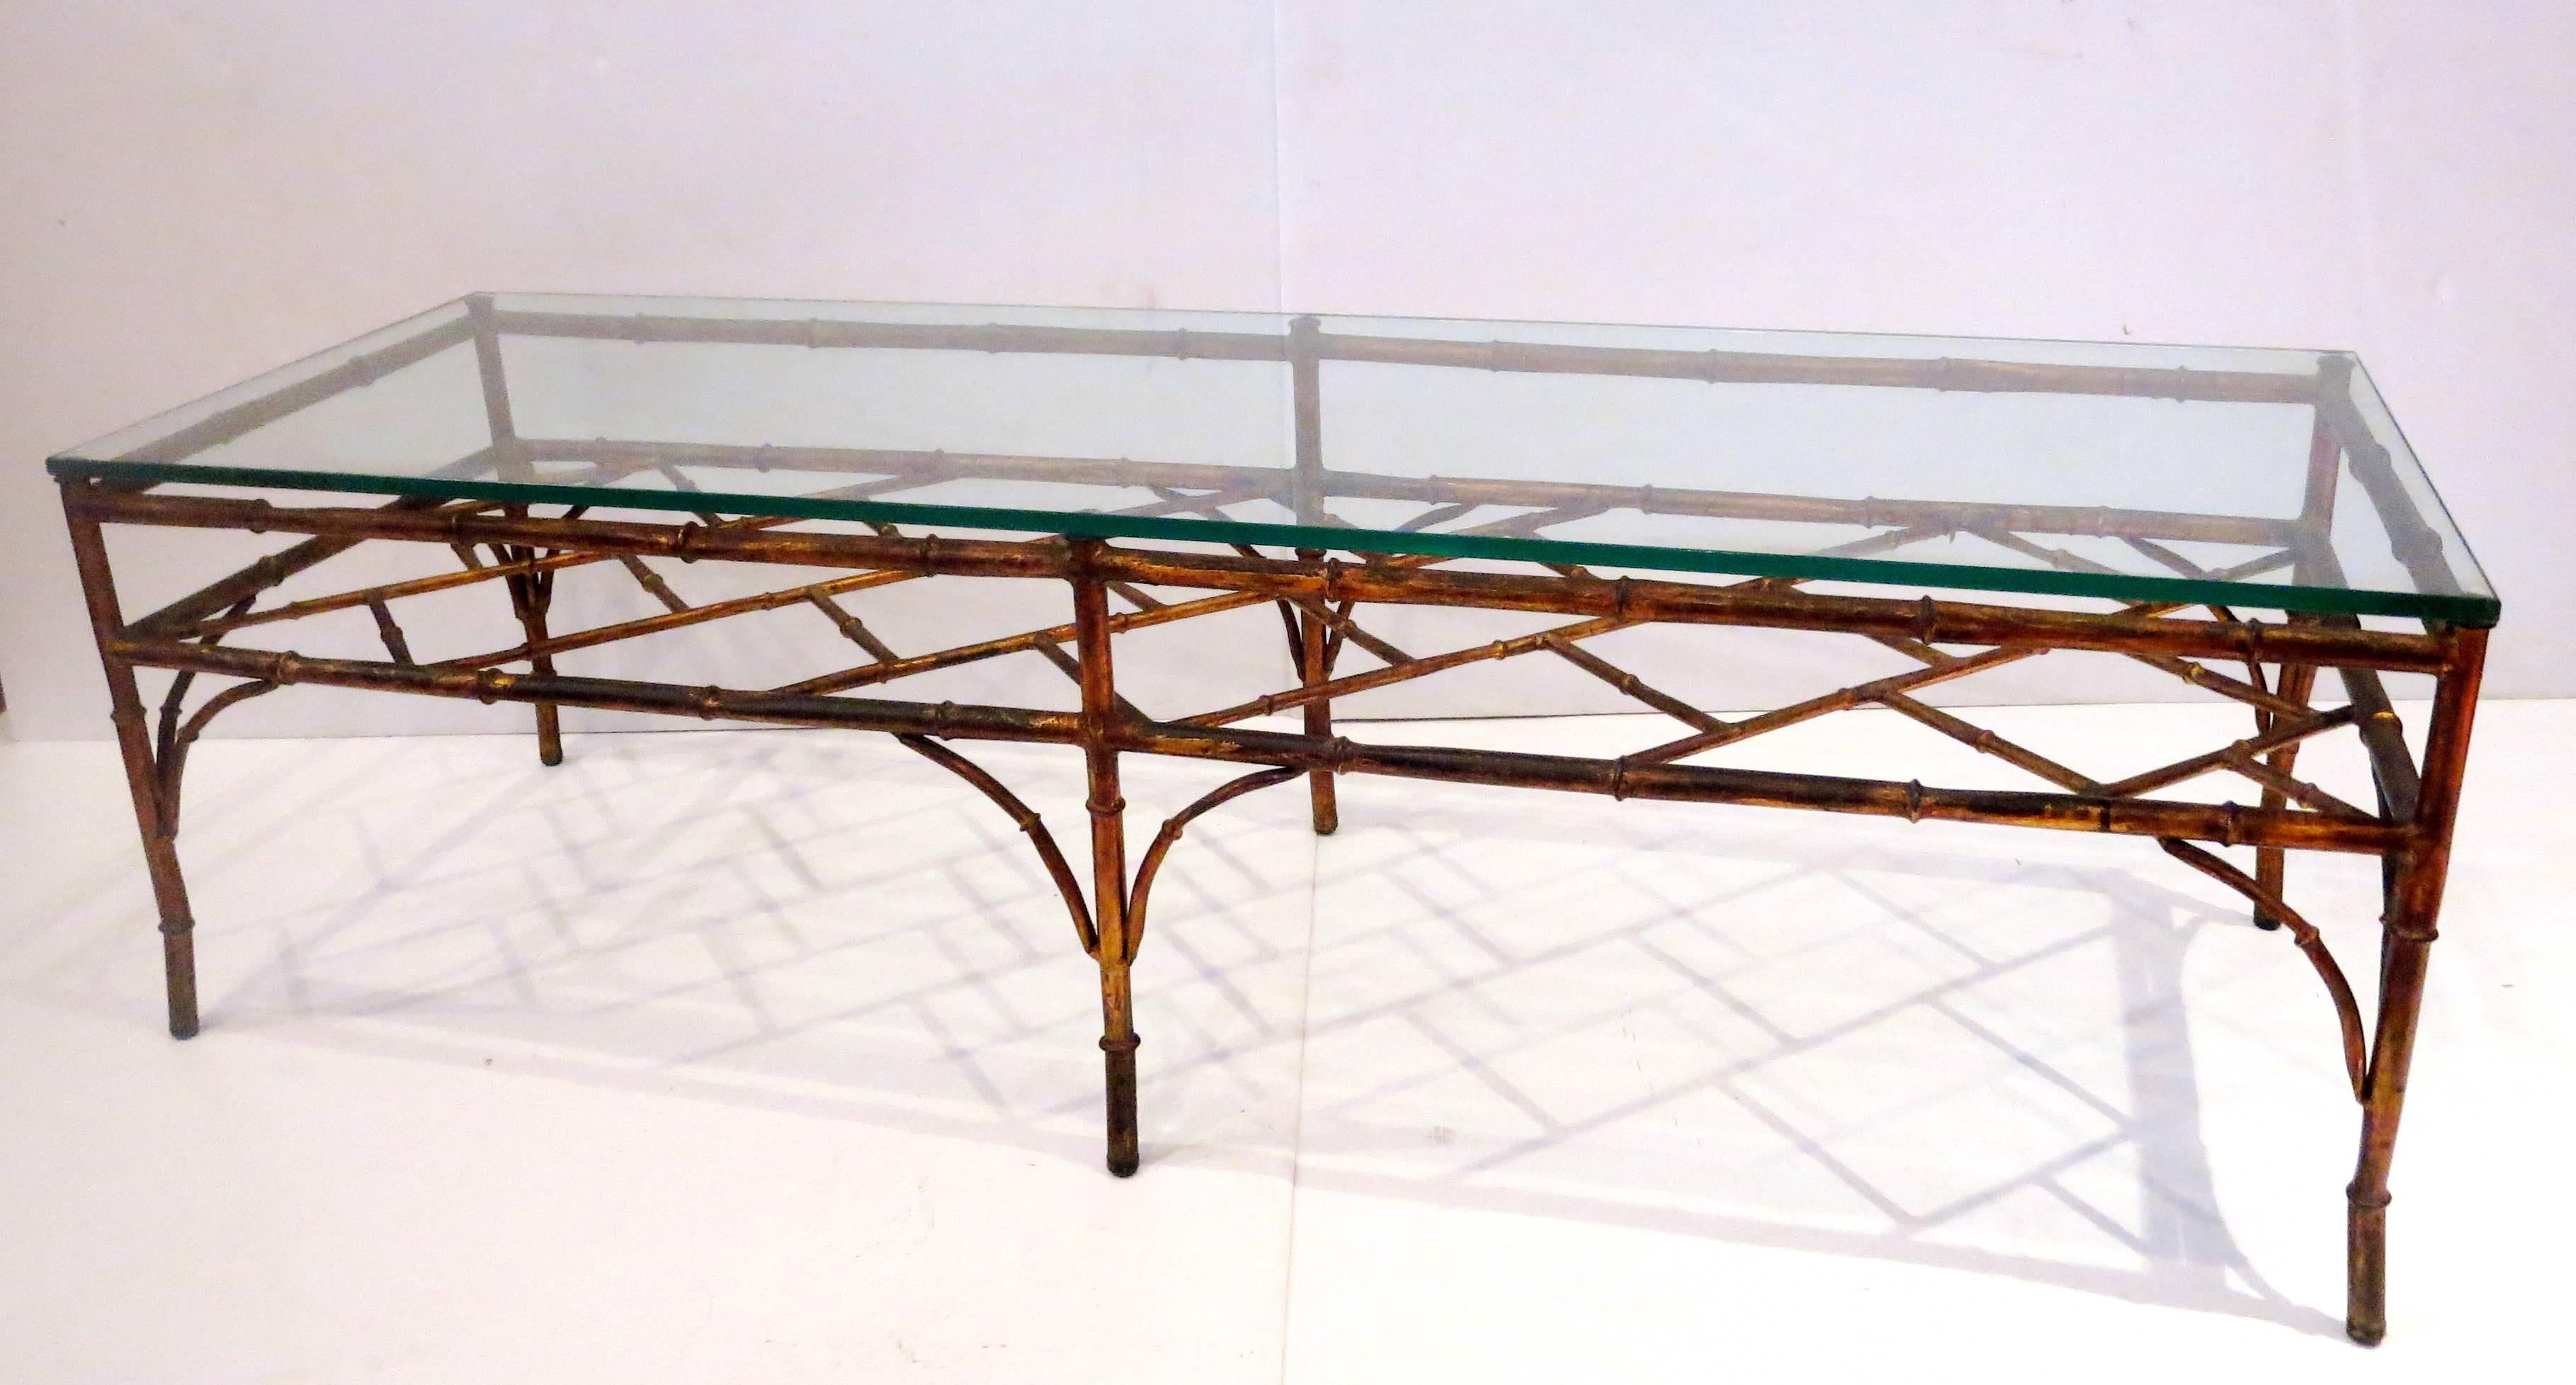 Elegant gold gilt tubular faux bamboo metal frame coffee table with thick glass top. Excellent condition, solid and sturdy. 